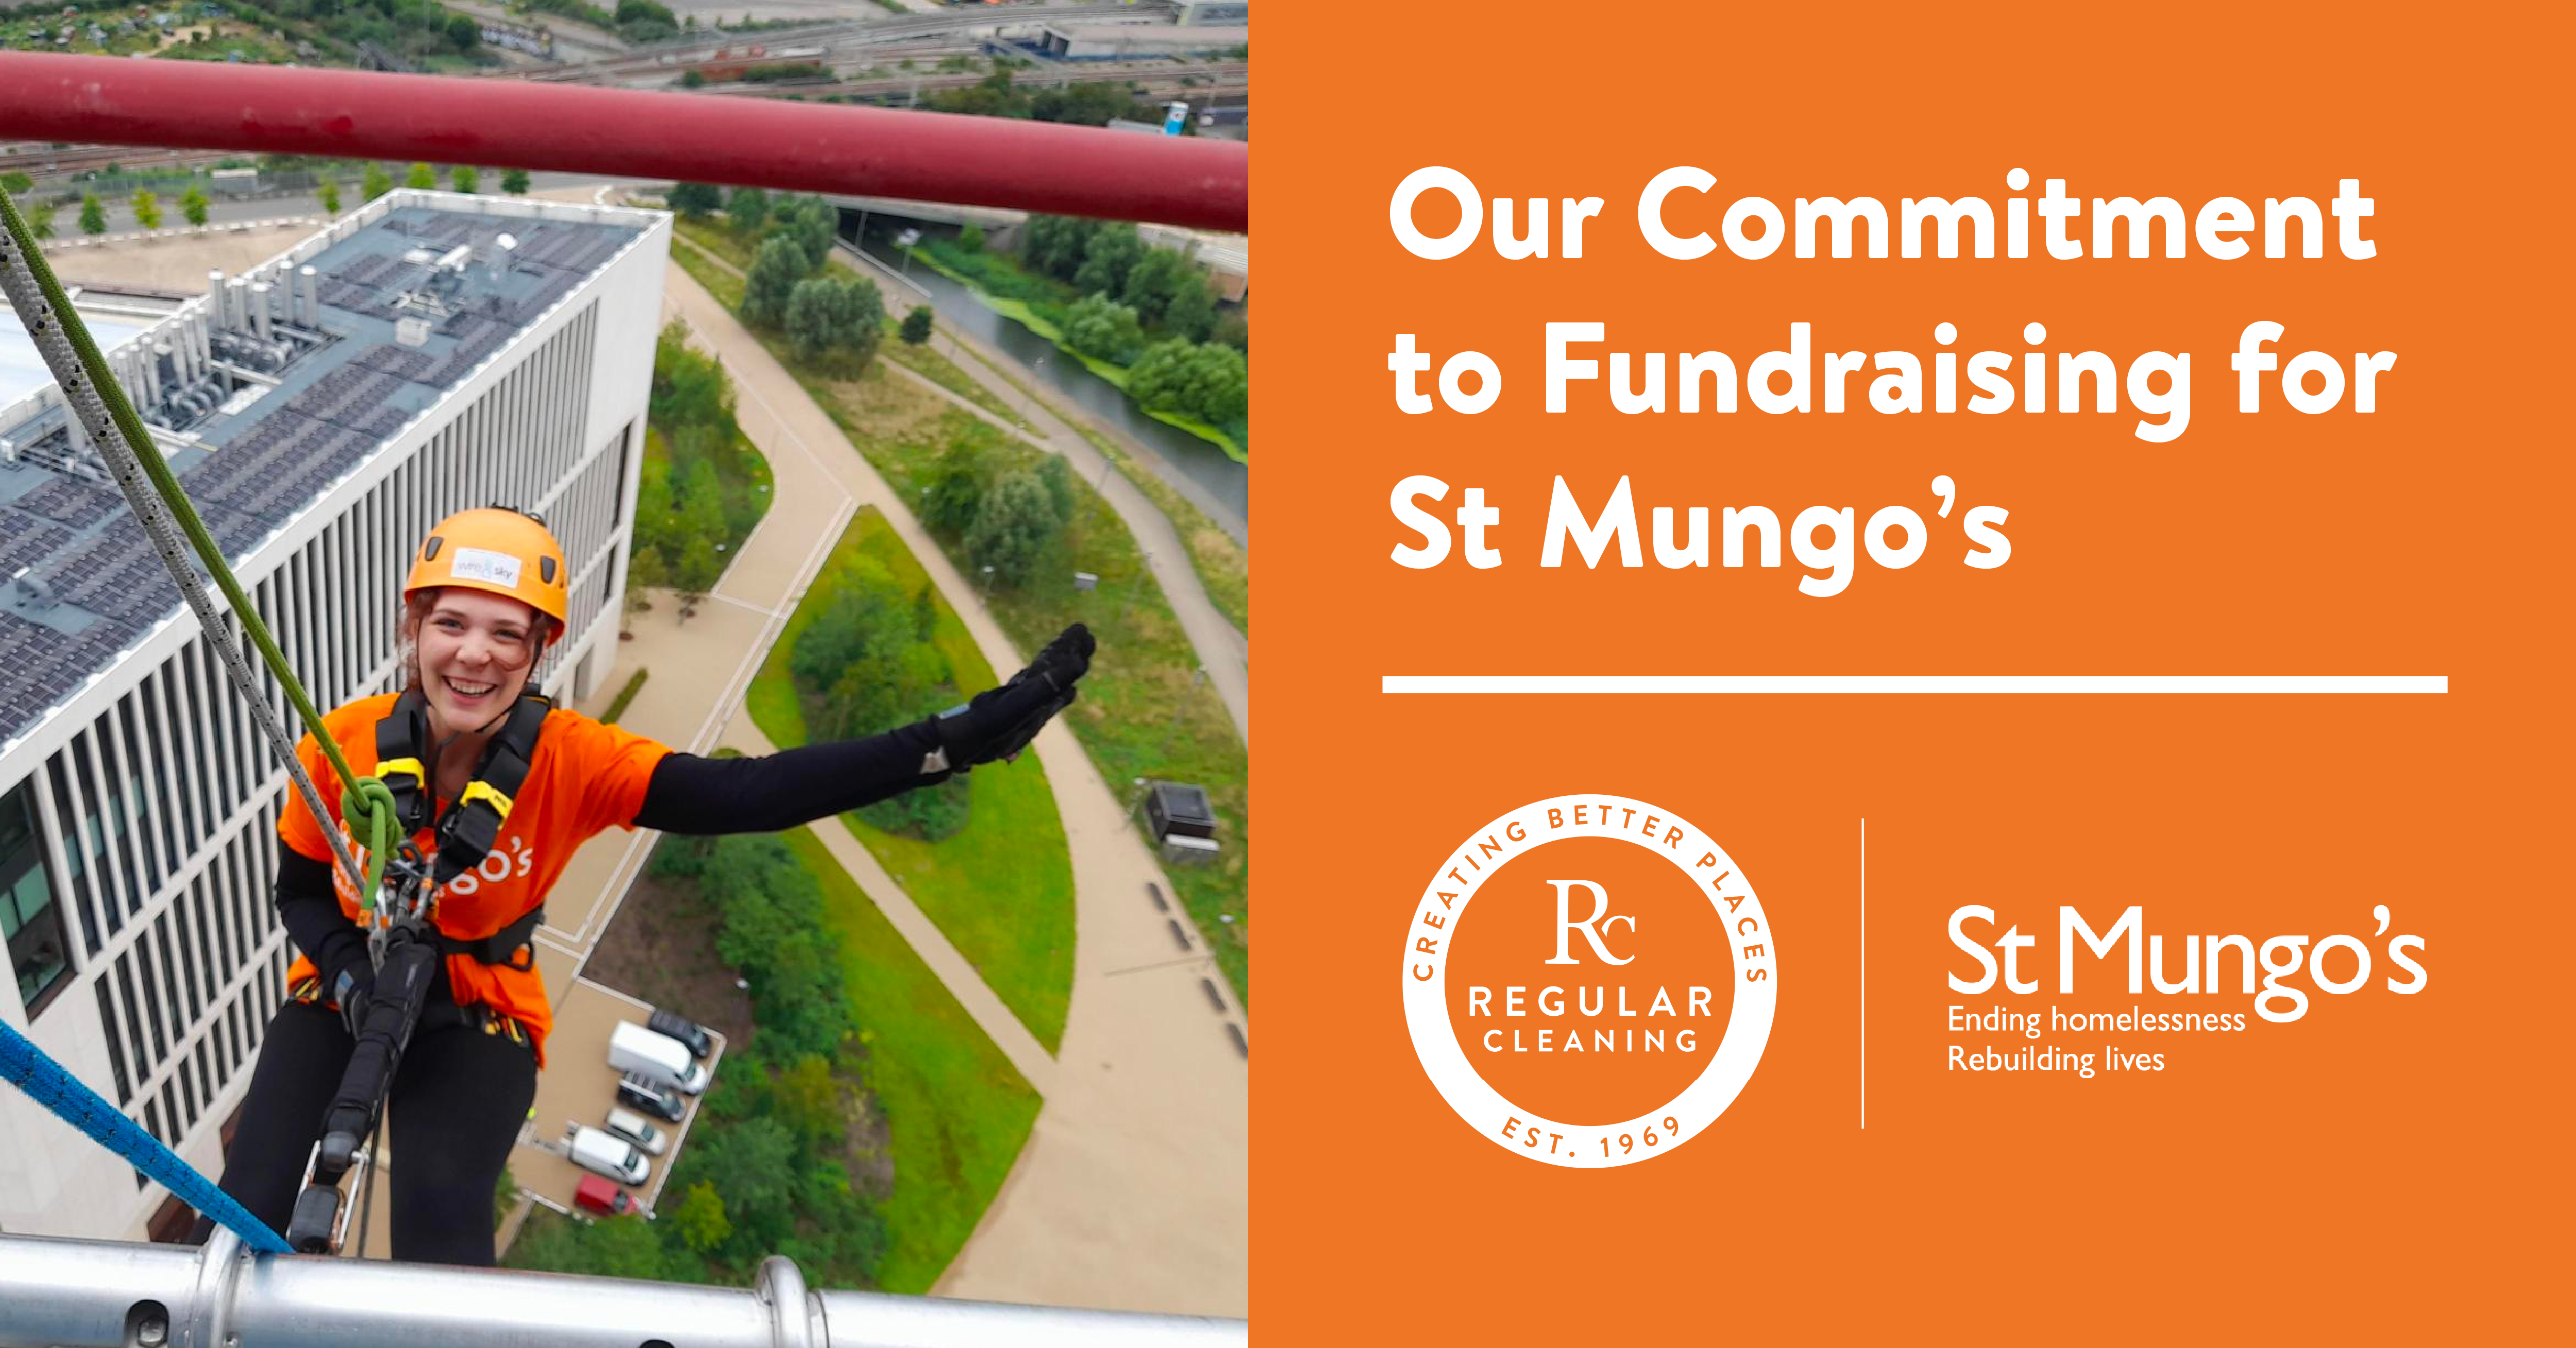 Fundraising for St Mungo's